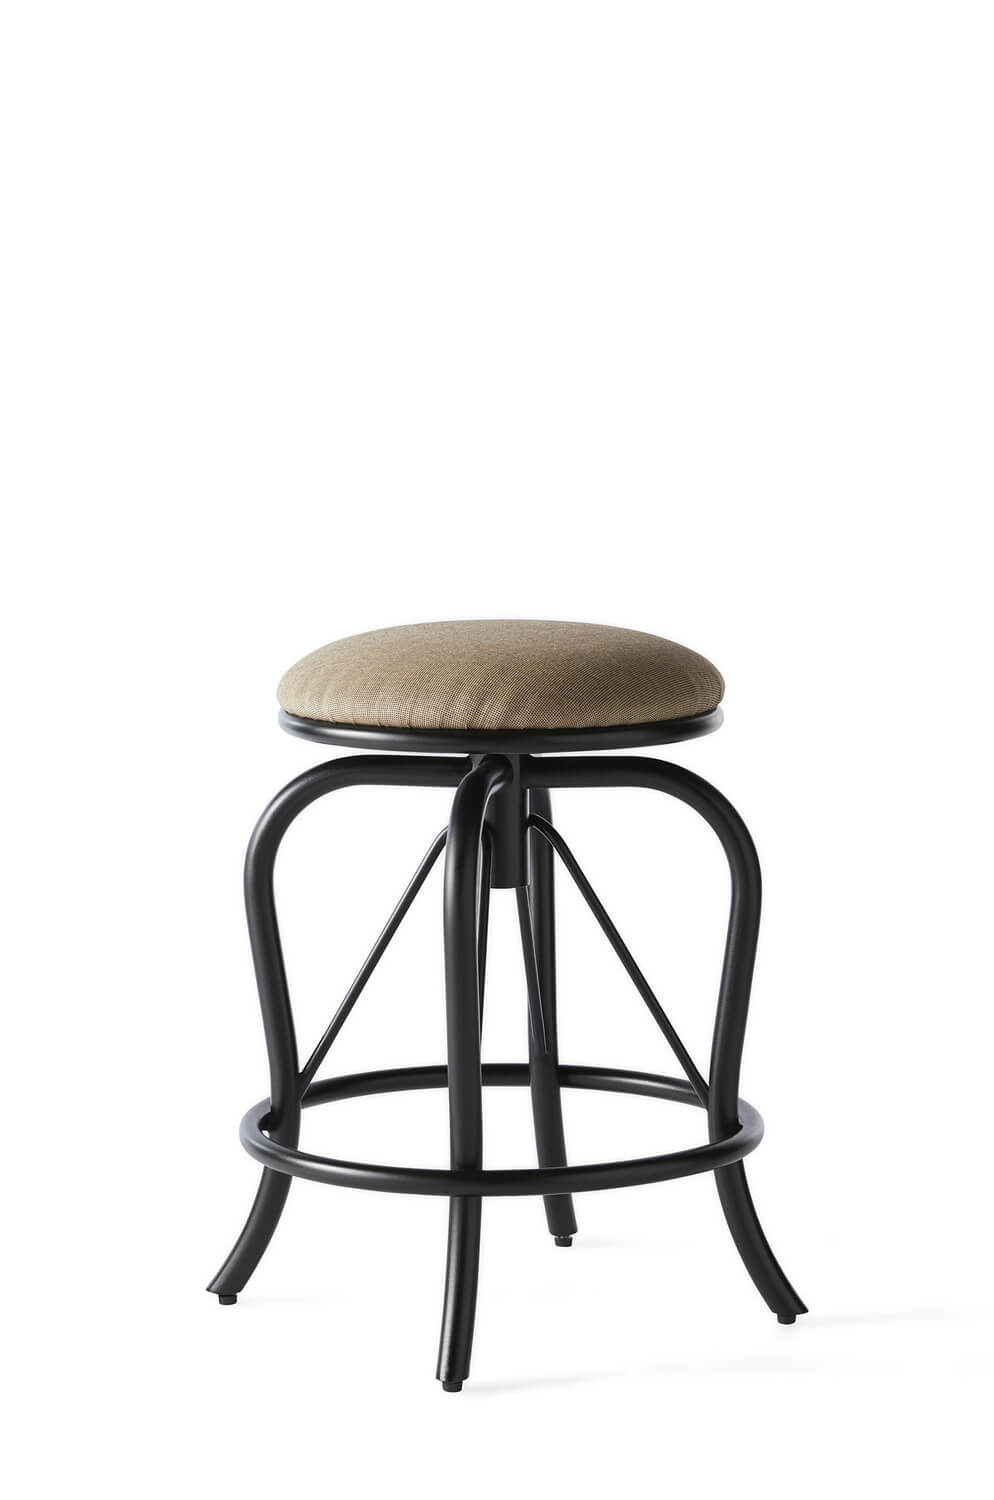 Mallin BS-010 M-Series Backless Outdoor Swivel Counter Stool